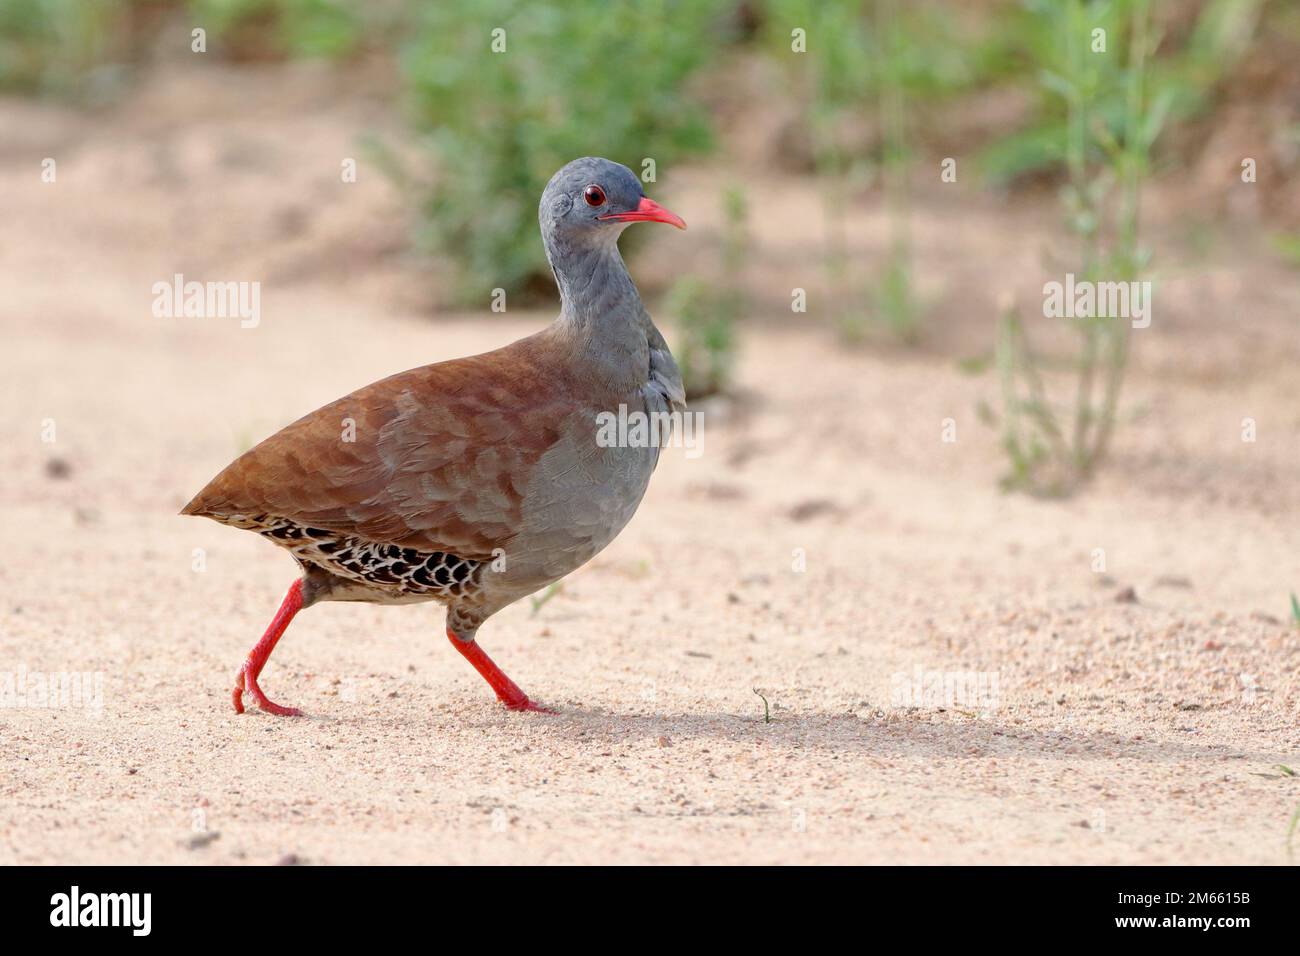 Small-billed Tinamou (Crypturellus parvirostris) walking on a mud road. Brazilian endemic bird difficult to visualize Stock Photo